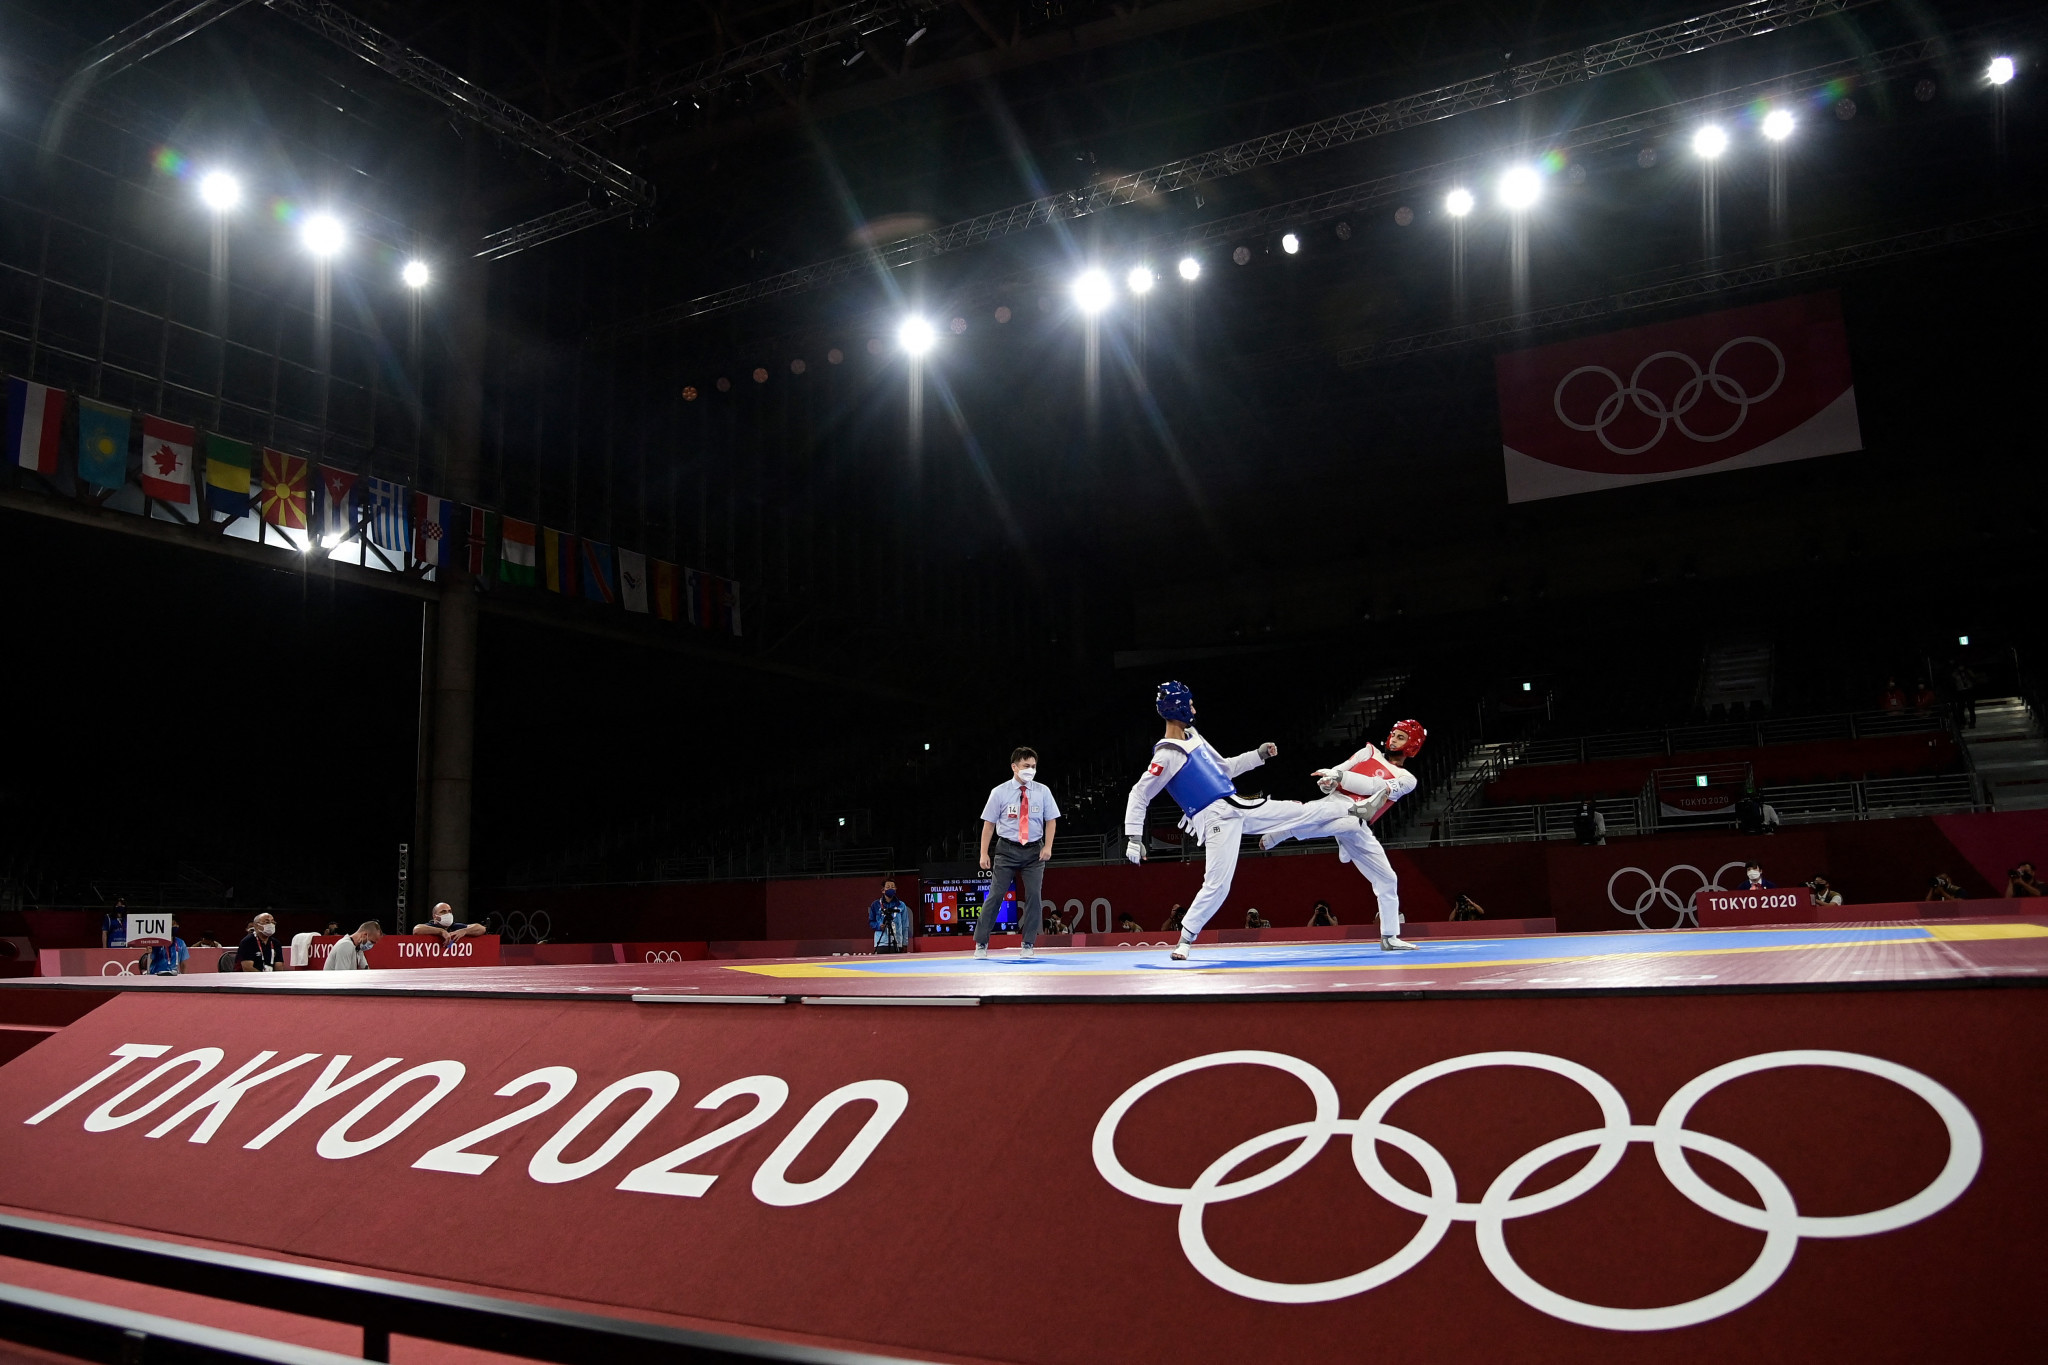 Taekwondo was among the sports where Africa's medal haul fell at Tokyo 2020 ©Getty Images